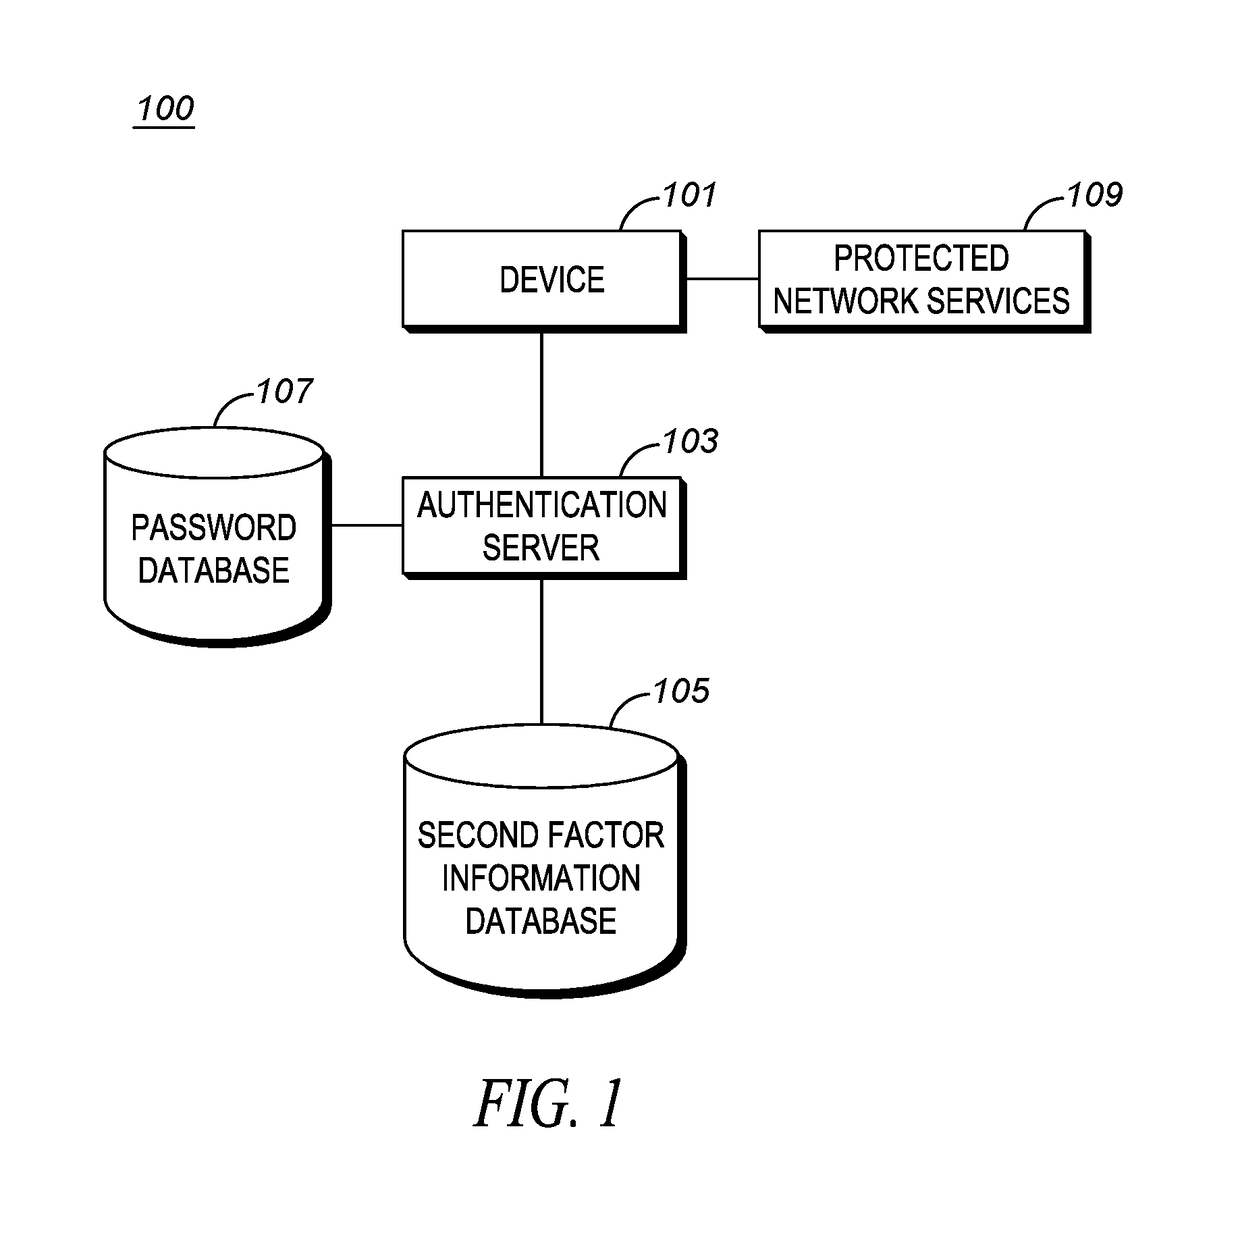 Method for automatically deleting a user password upon successful use of a multi-factor authentication modality